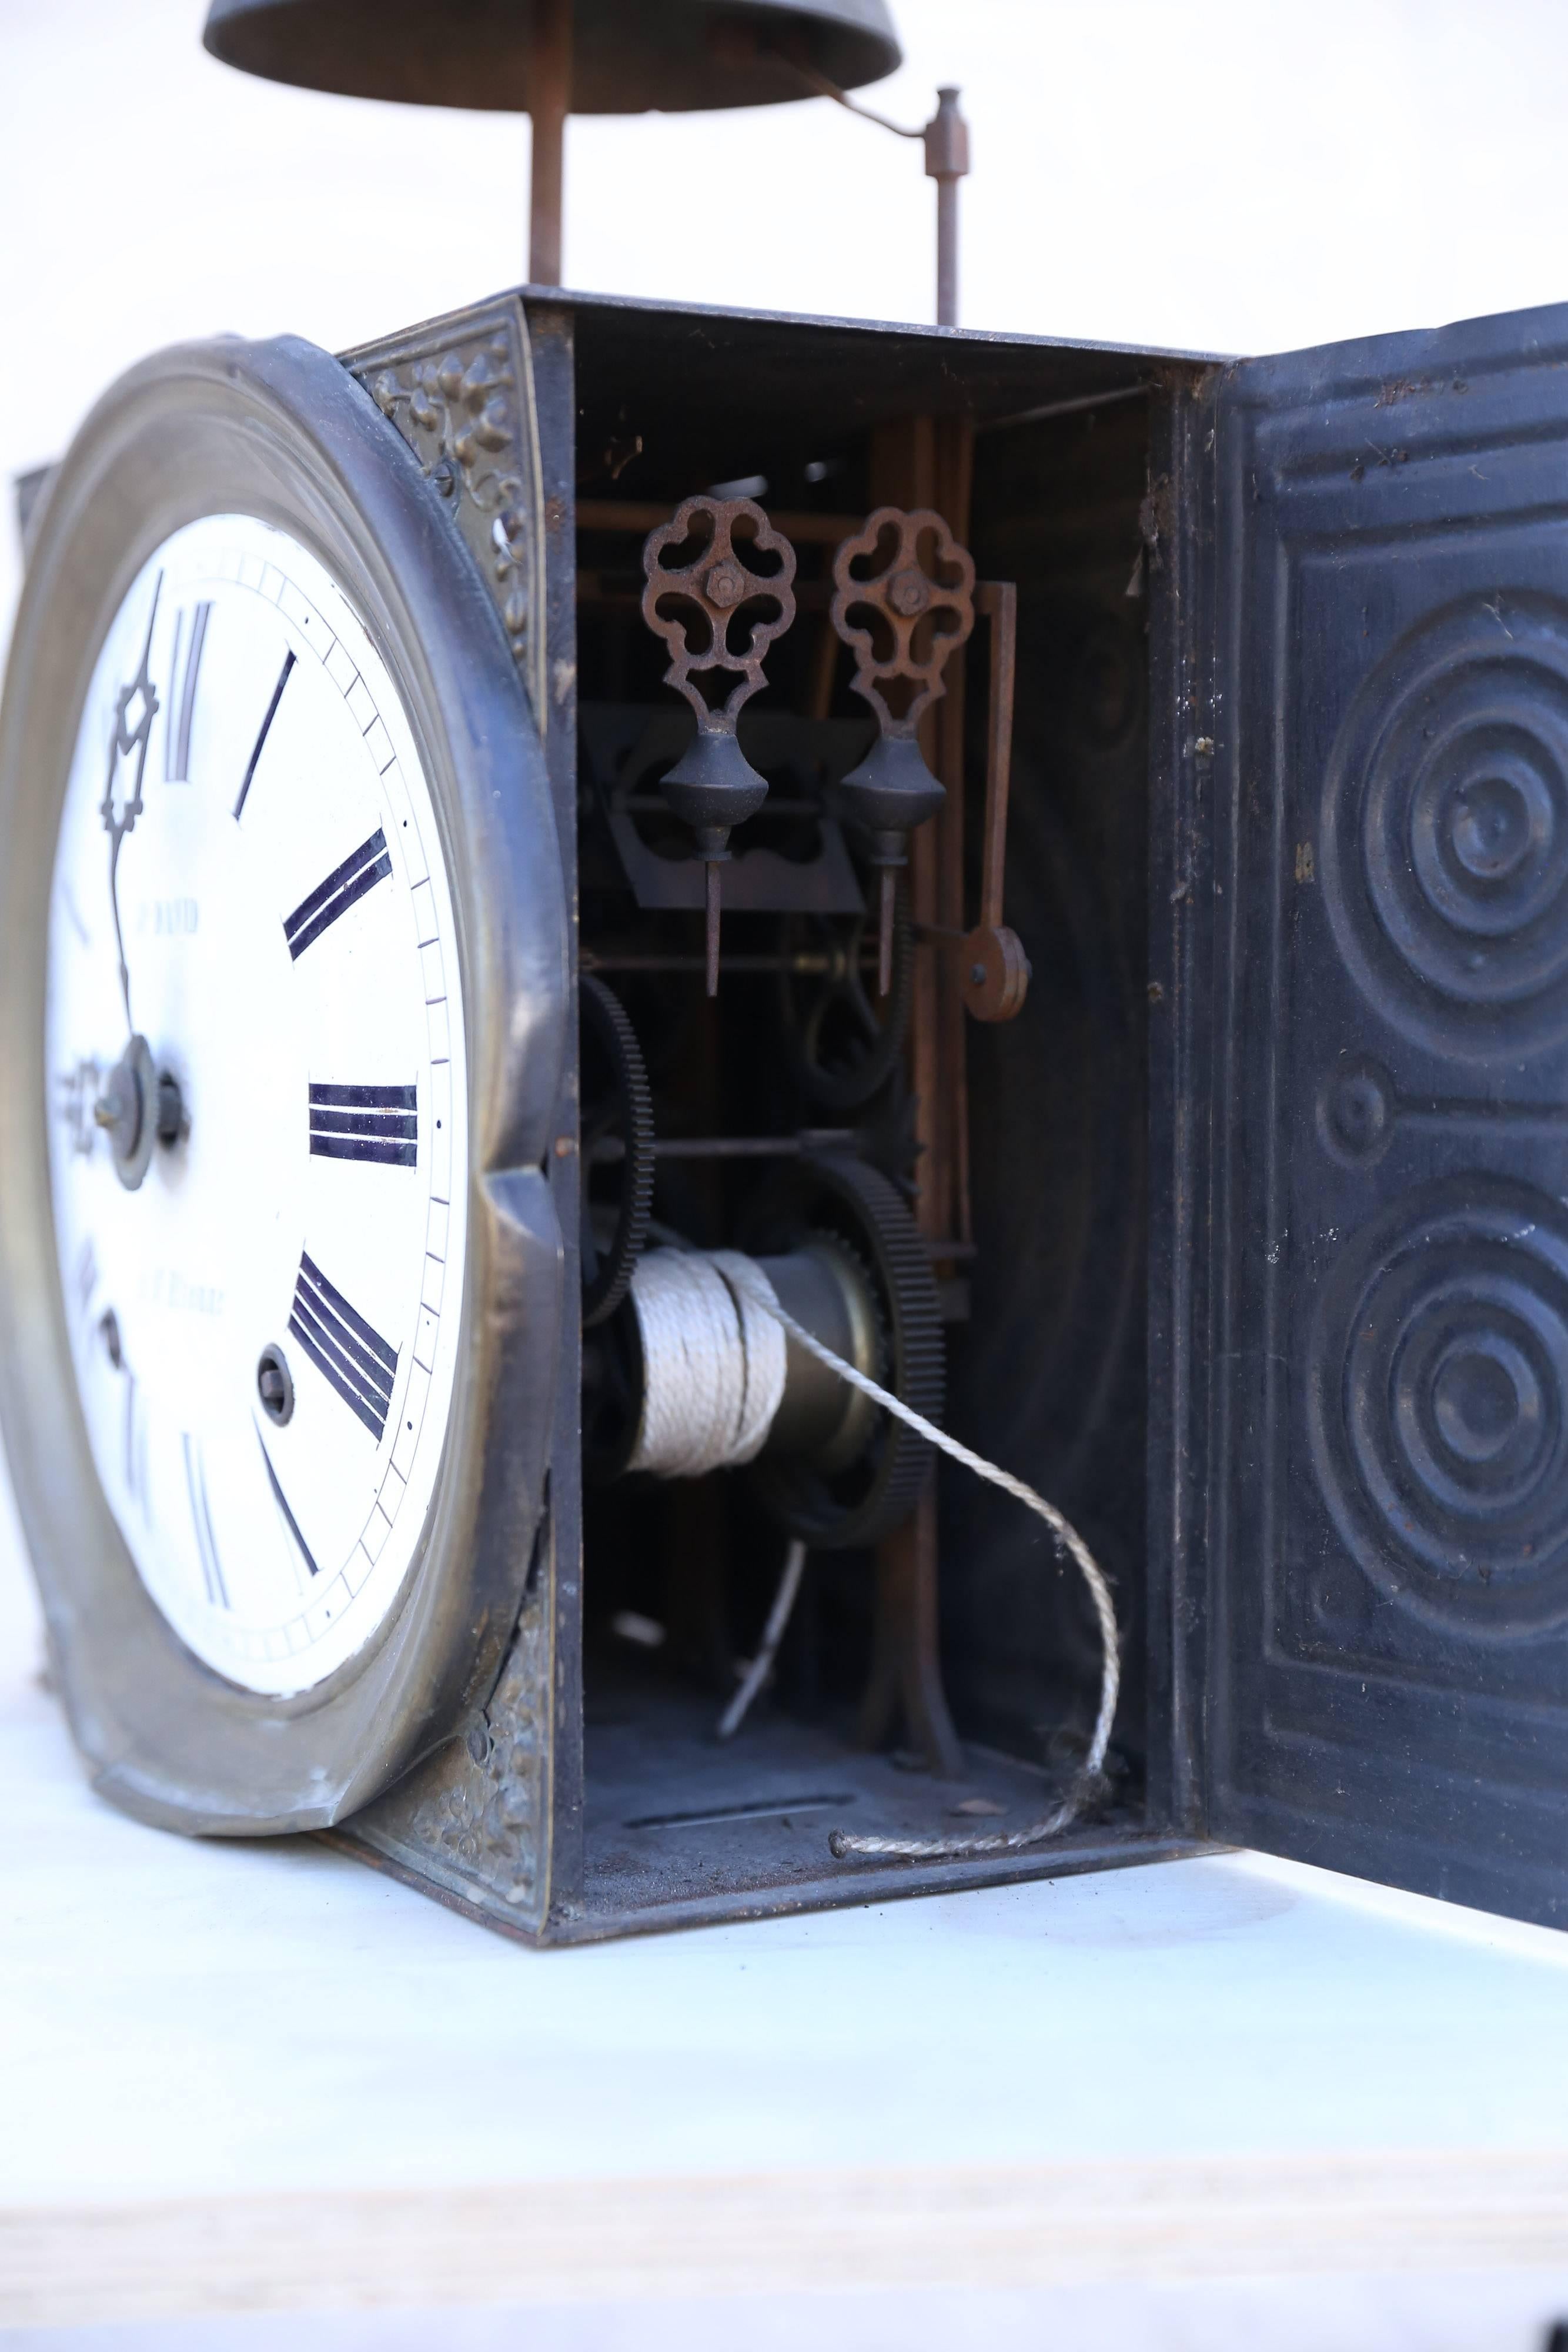 The face and inner workings of an old Grandfather's clock. Although it is no longer a working timepiece, time has not run out for this wonderful bit of yesteryear. Its proud face and ornate tin casing are topped by a splendid and imposing bell with